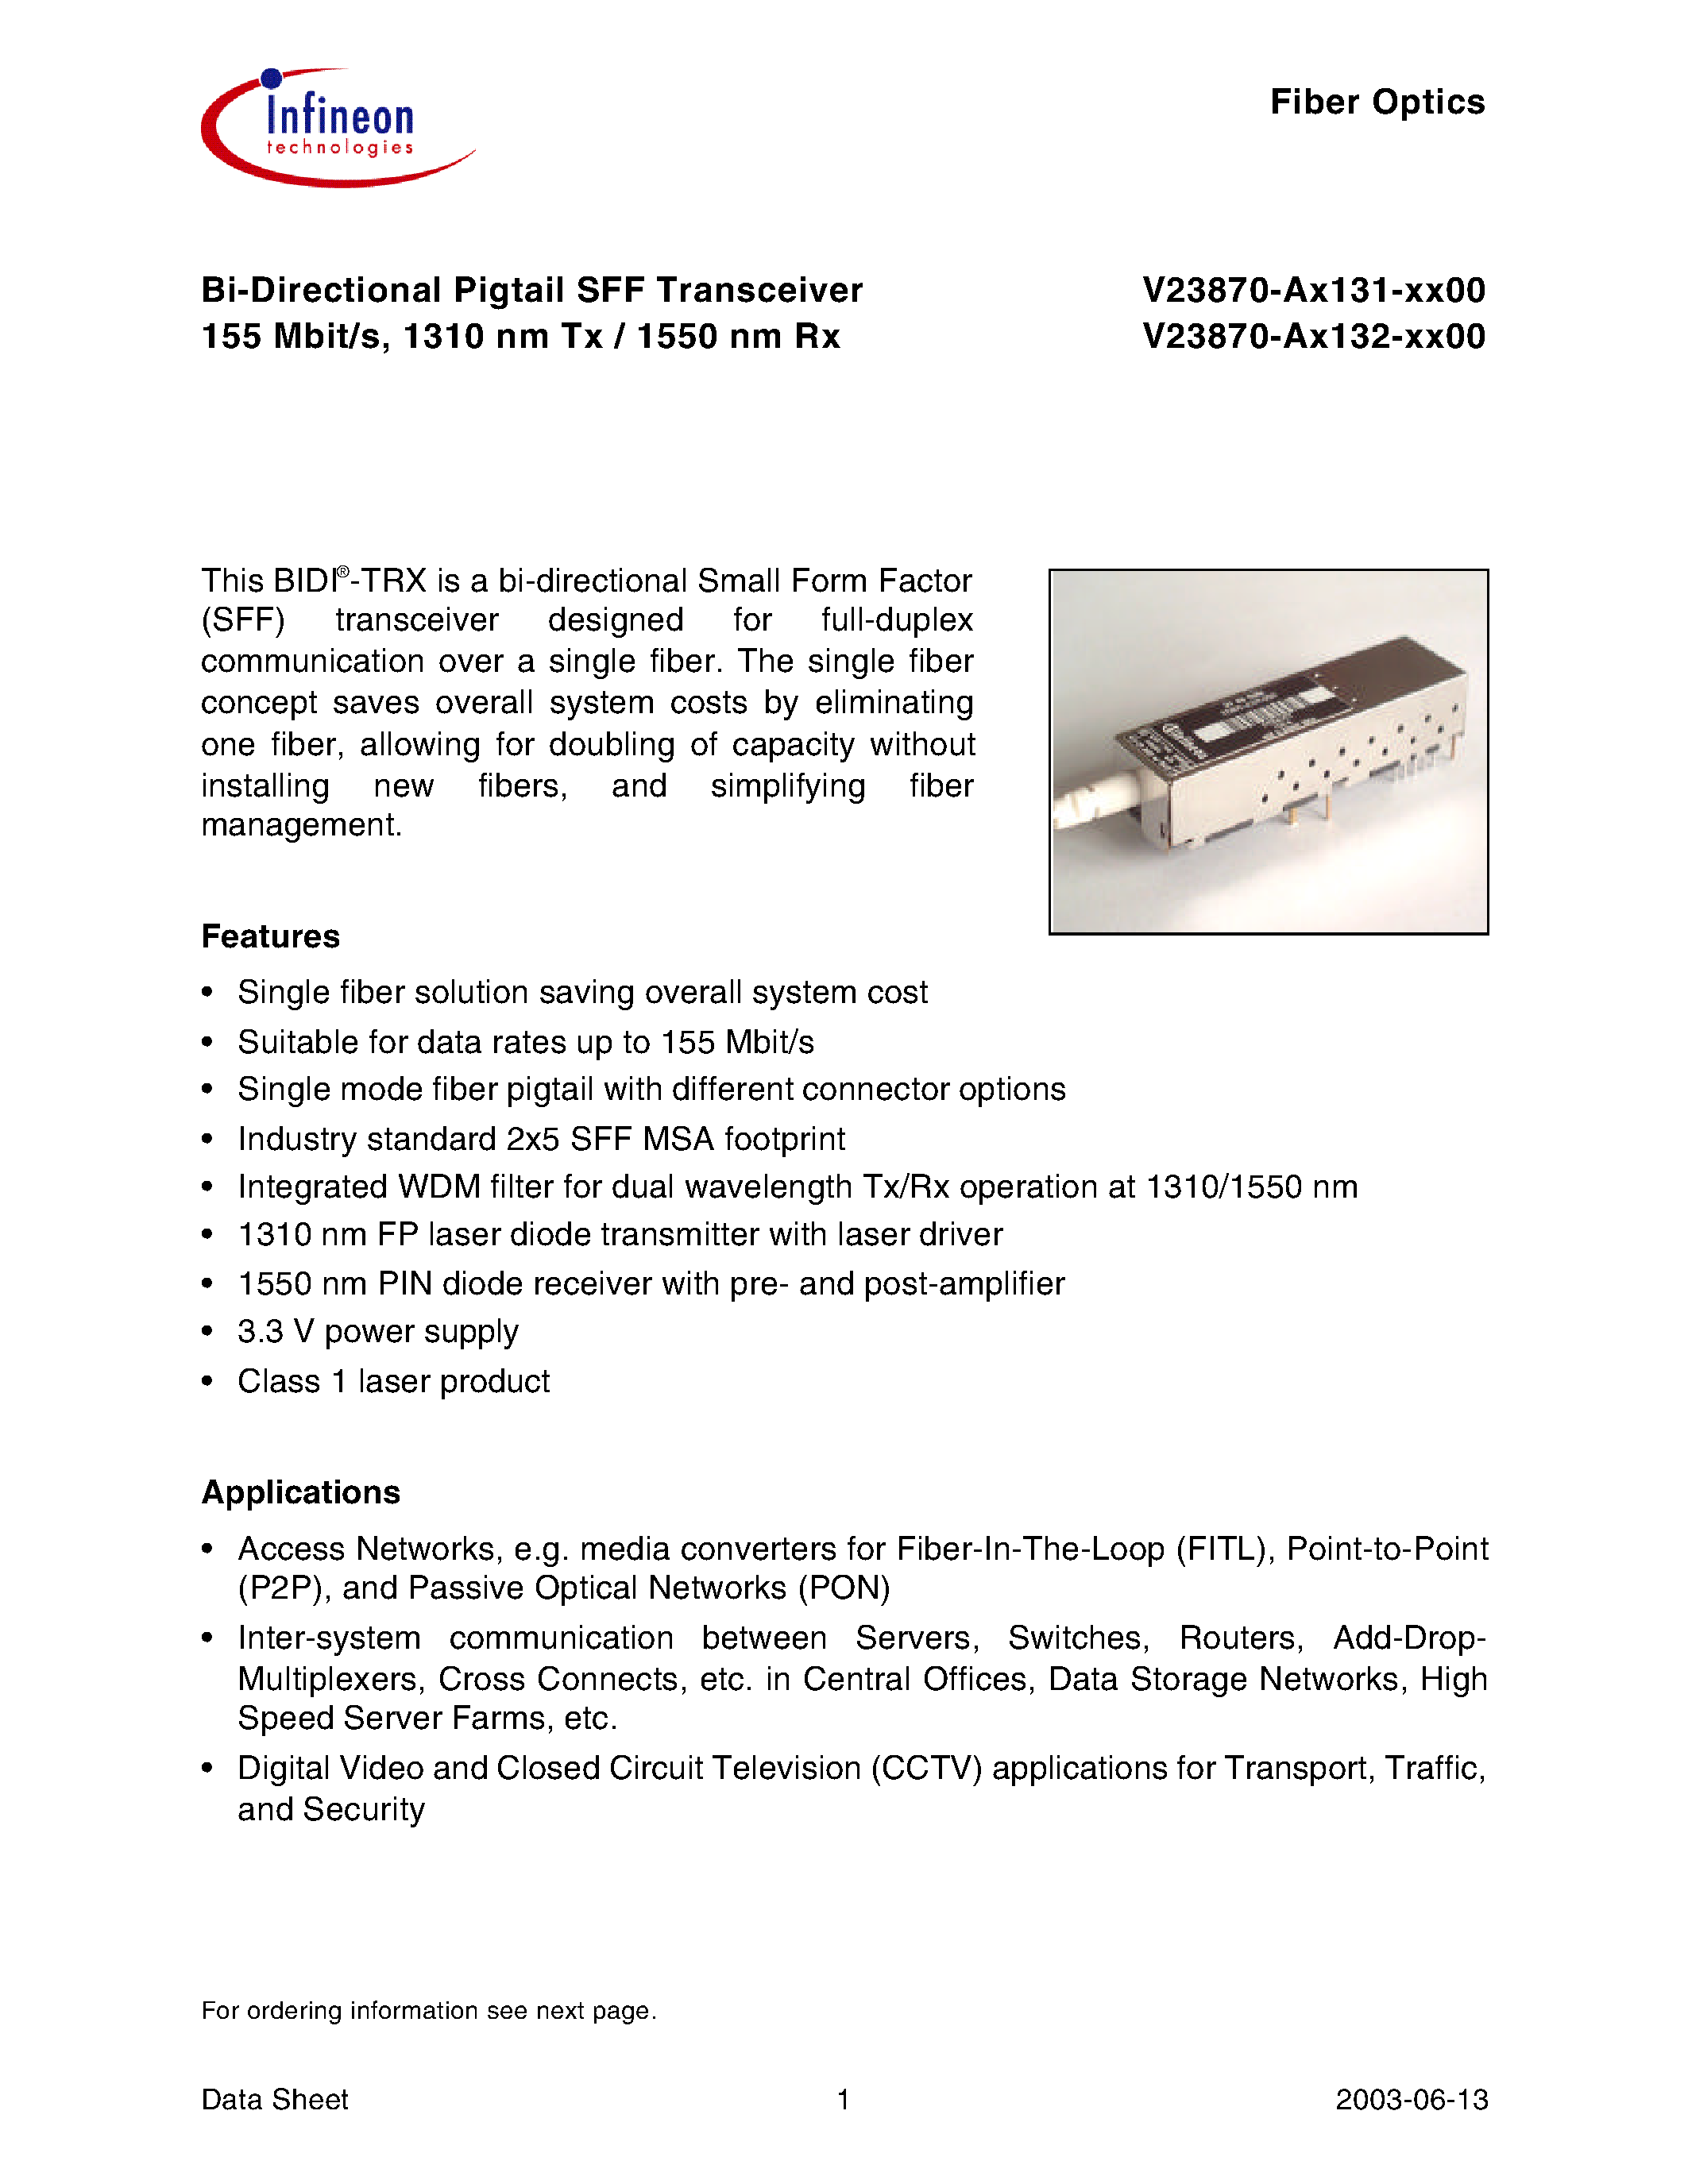 Datasheet V23870-A1131-H100 - Bi-Directional Pigtail SFF Transceiver 155 Mbit/s/ 1310 nm Tx / 1550 nm Rx page 1